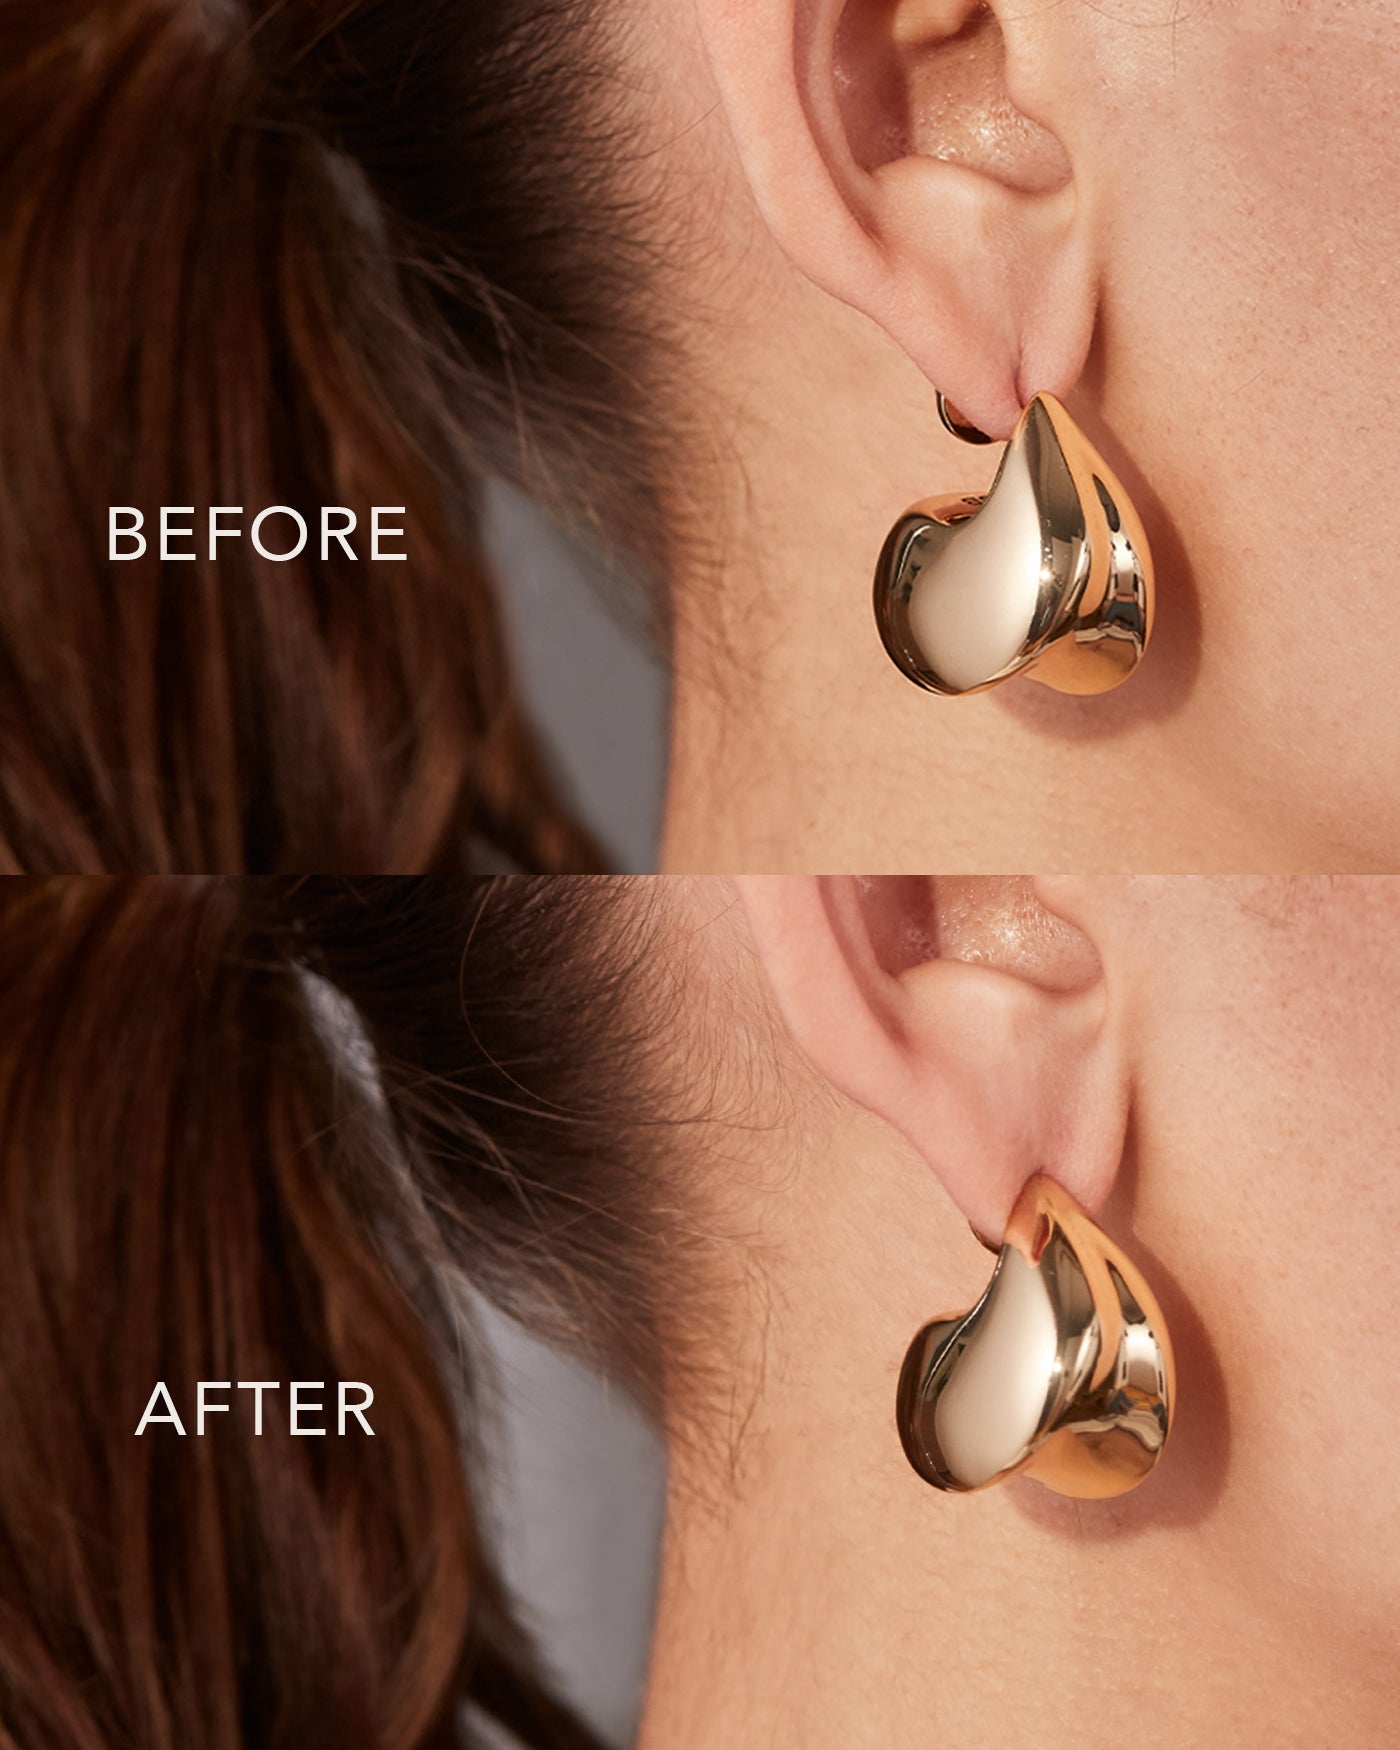 The Daith Piercing: Everything You Need to Know | FreshTrends